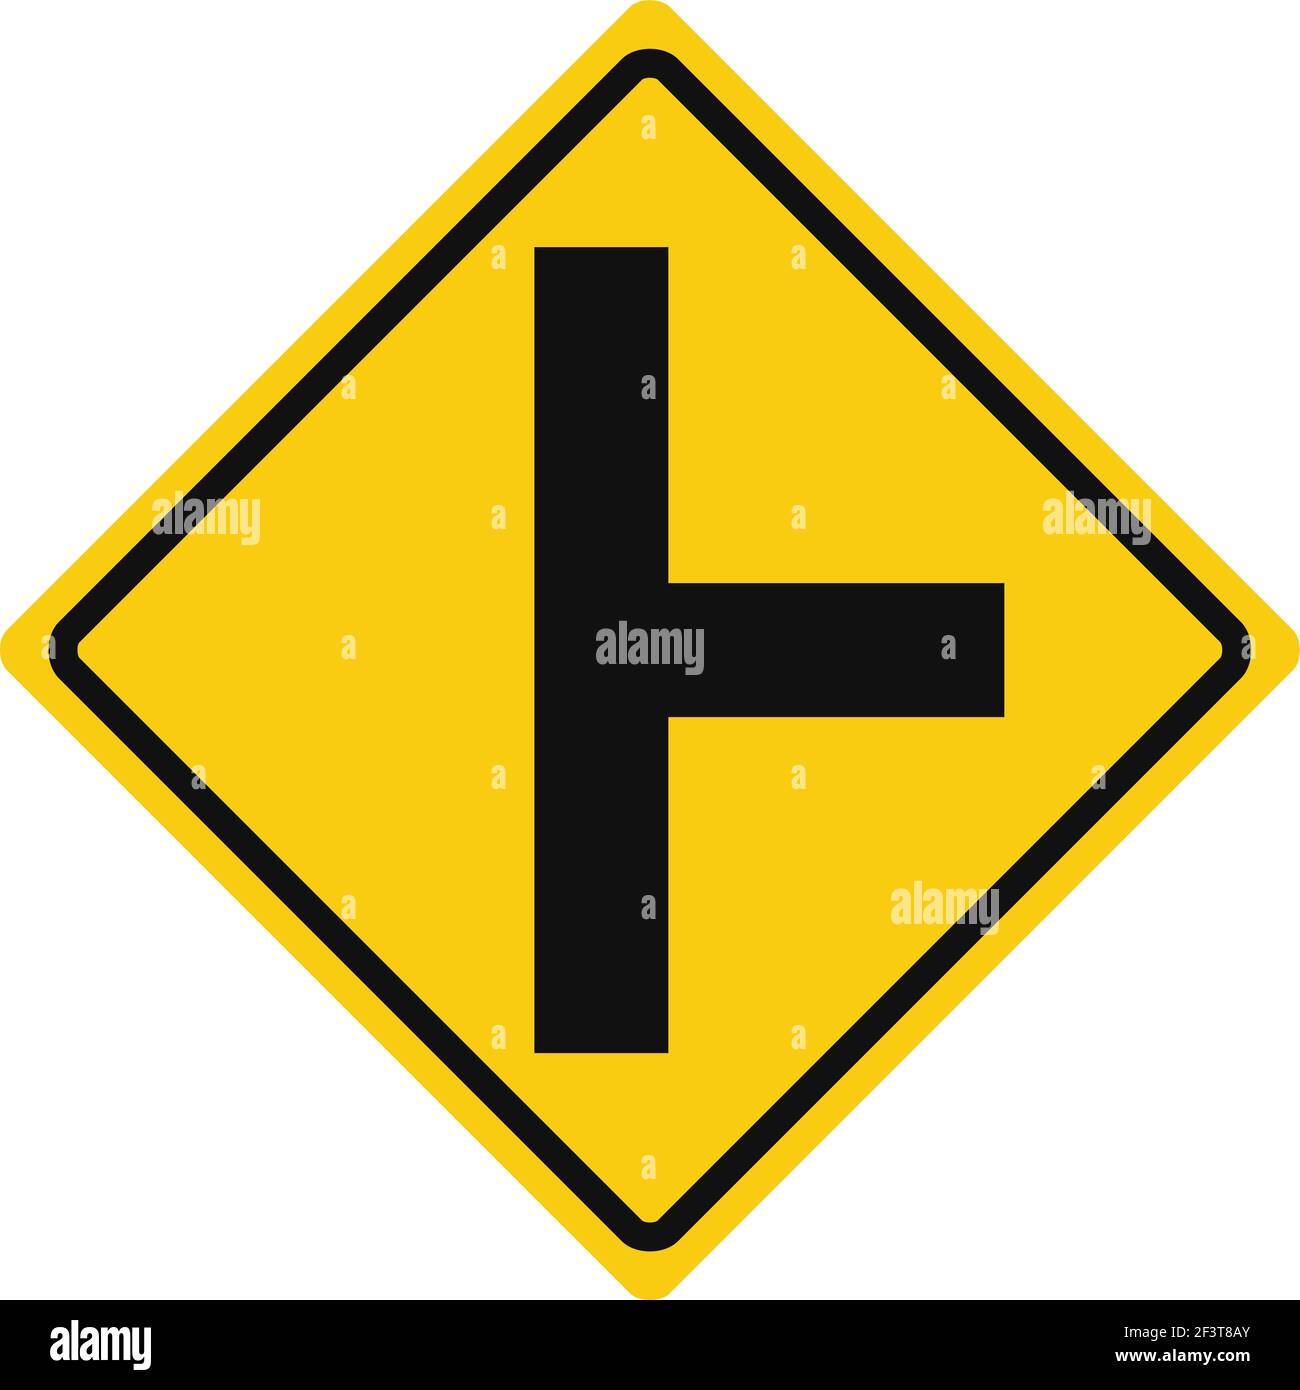 Rhomboid traffic signal in yellow and black, isolated on white background. Warning of side road on the right  at a perpendicular angle Stock Vector